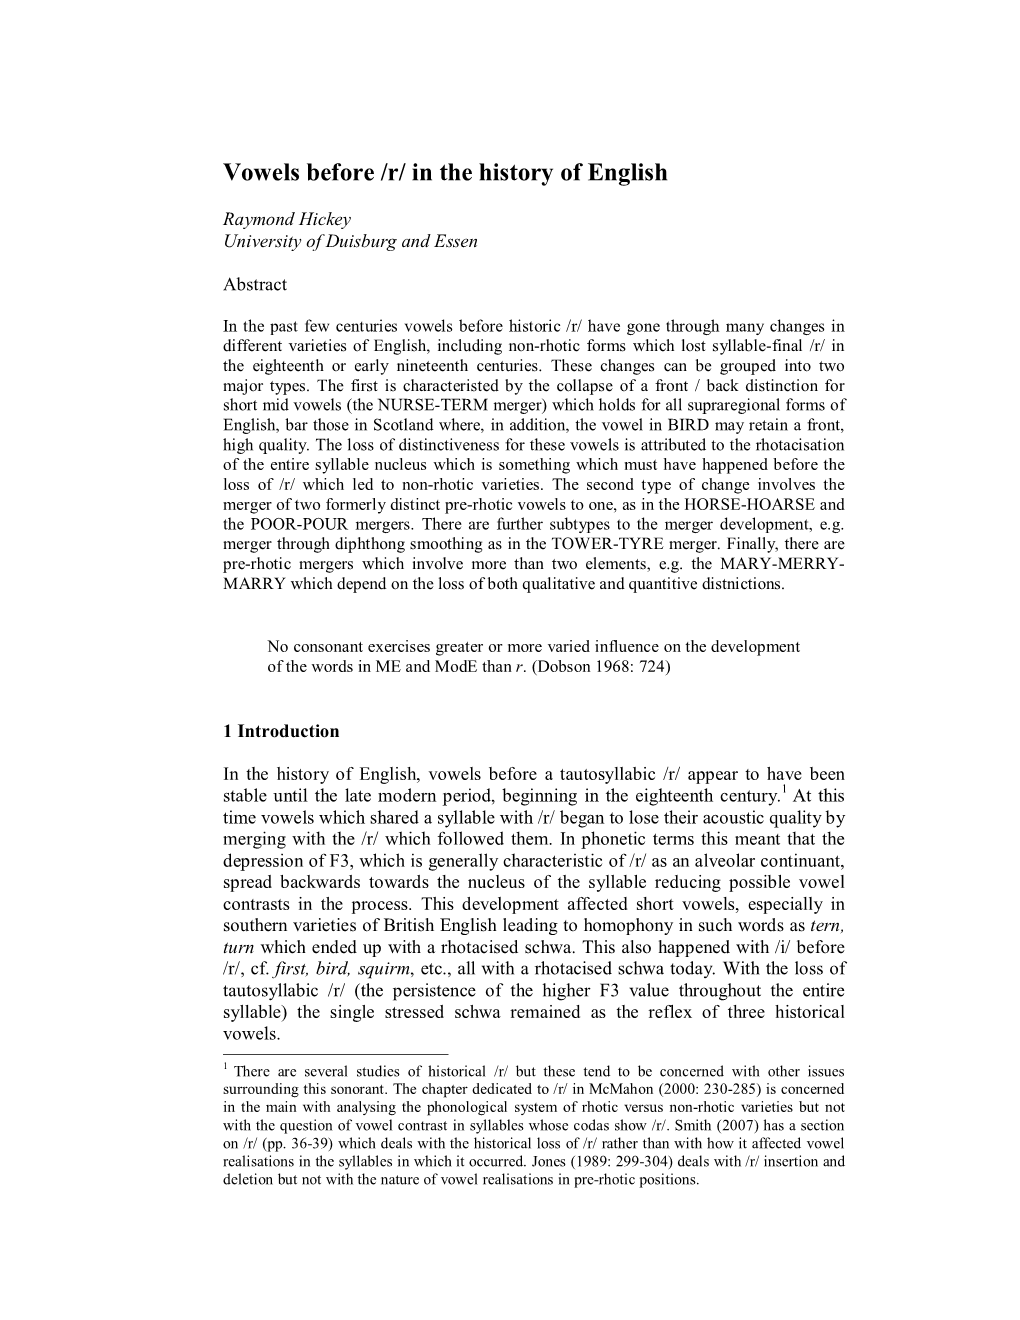 Vowels Before /R/ in the History of English